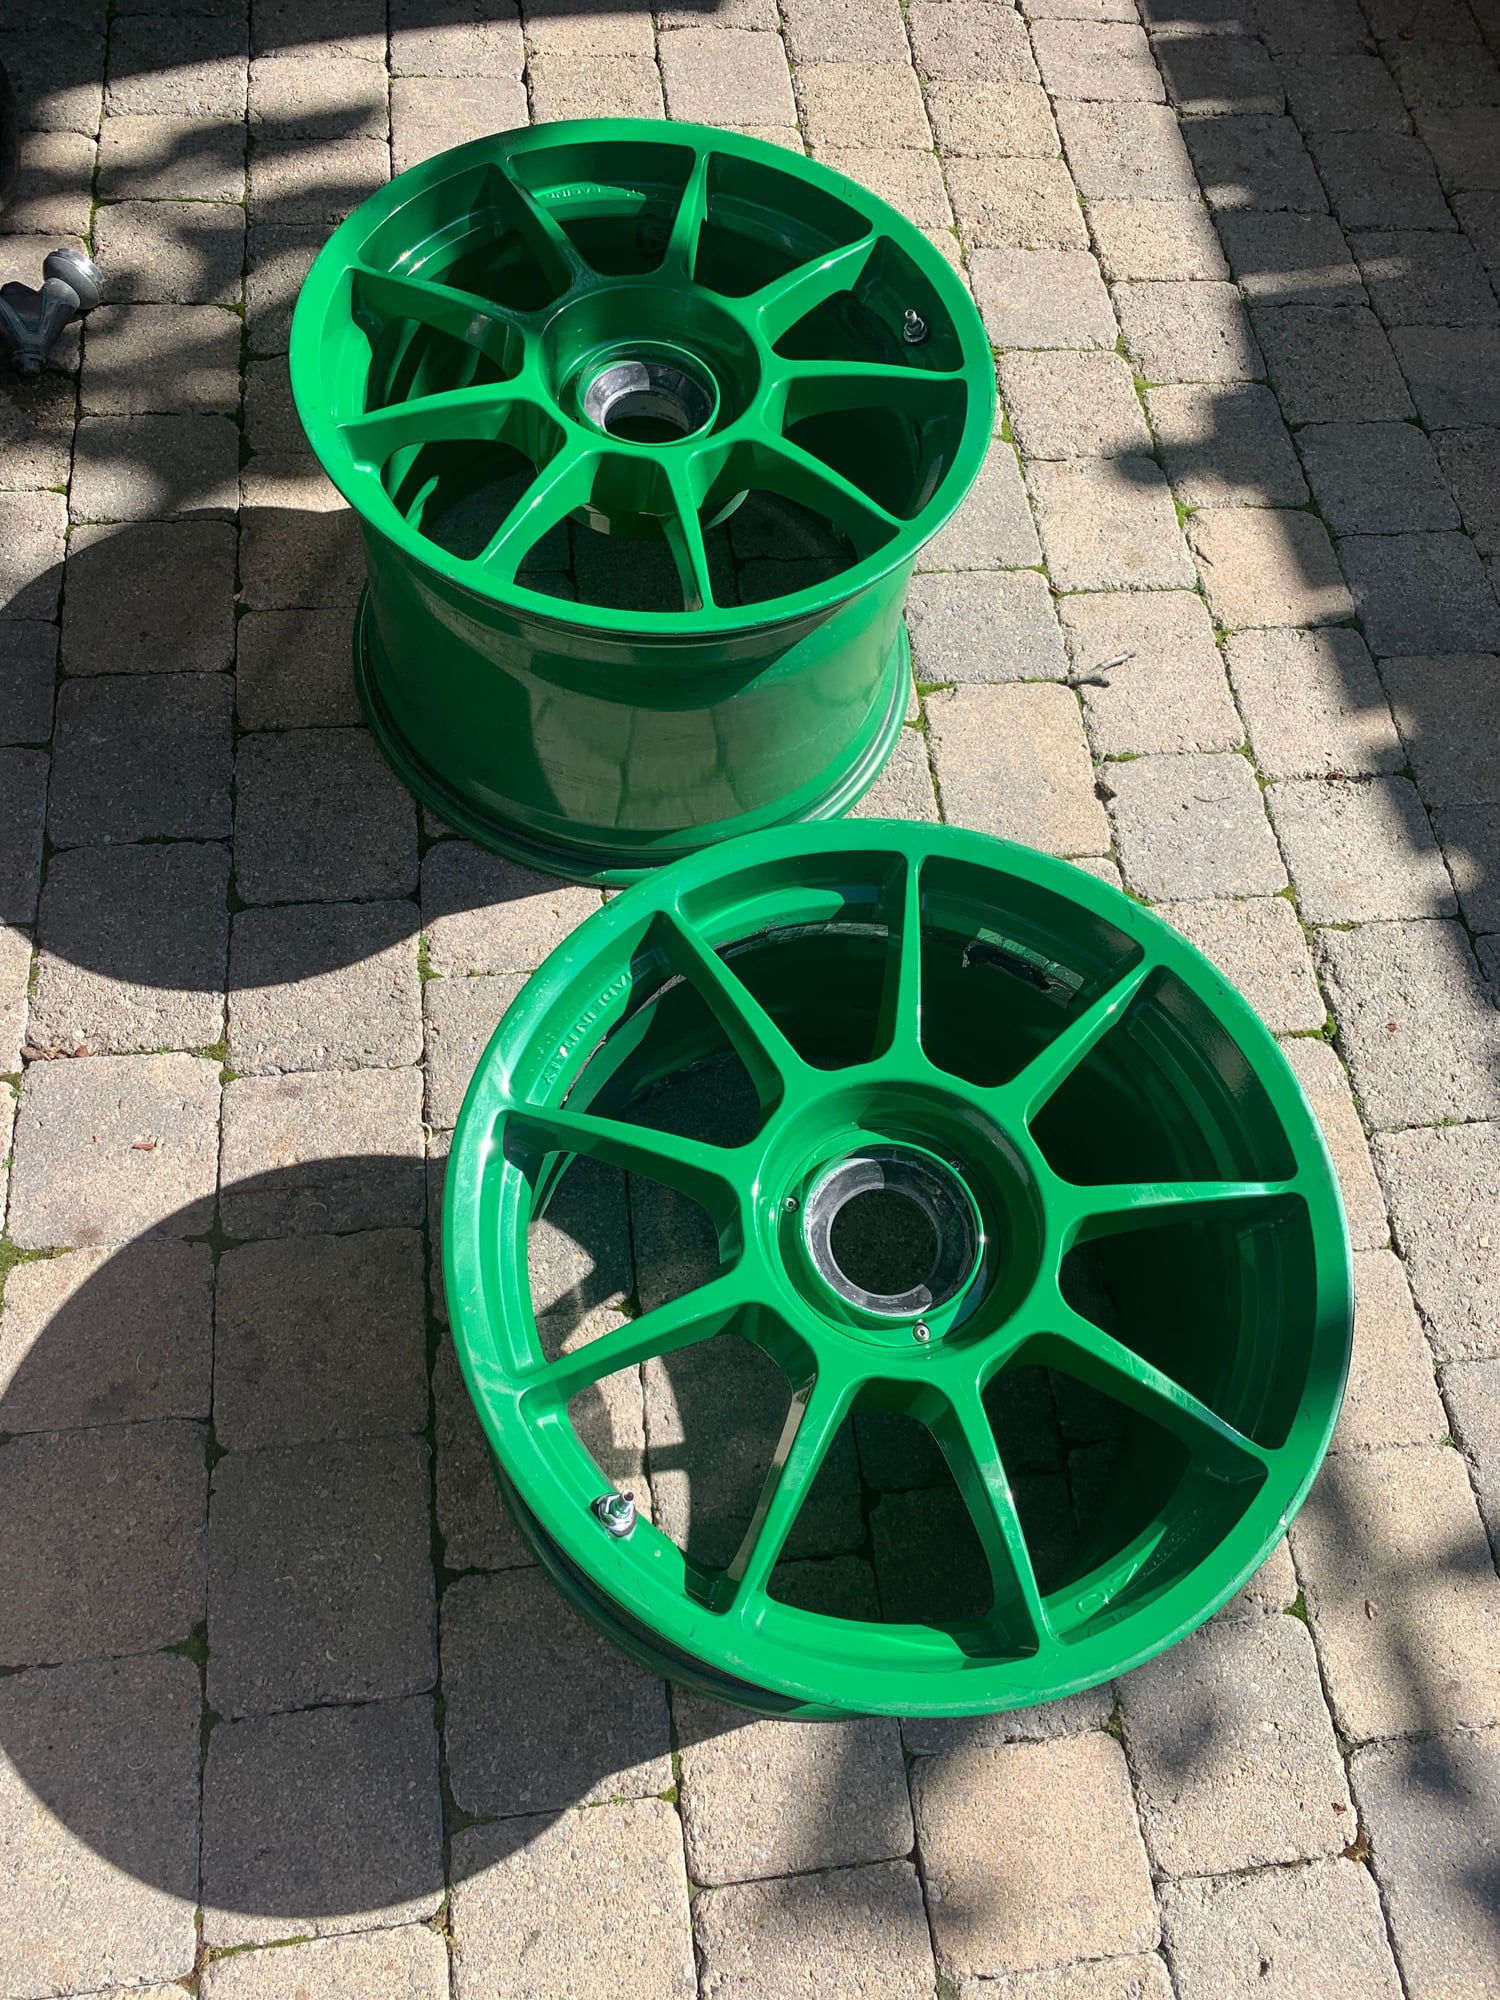 Accessories - GT3 997.2 parts and wheels for sale - Used - Champlain, NY 12919, United States